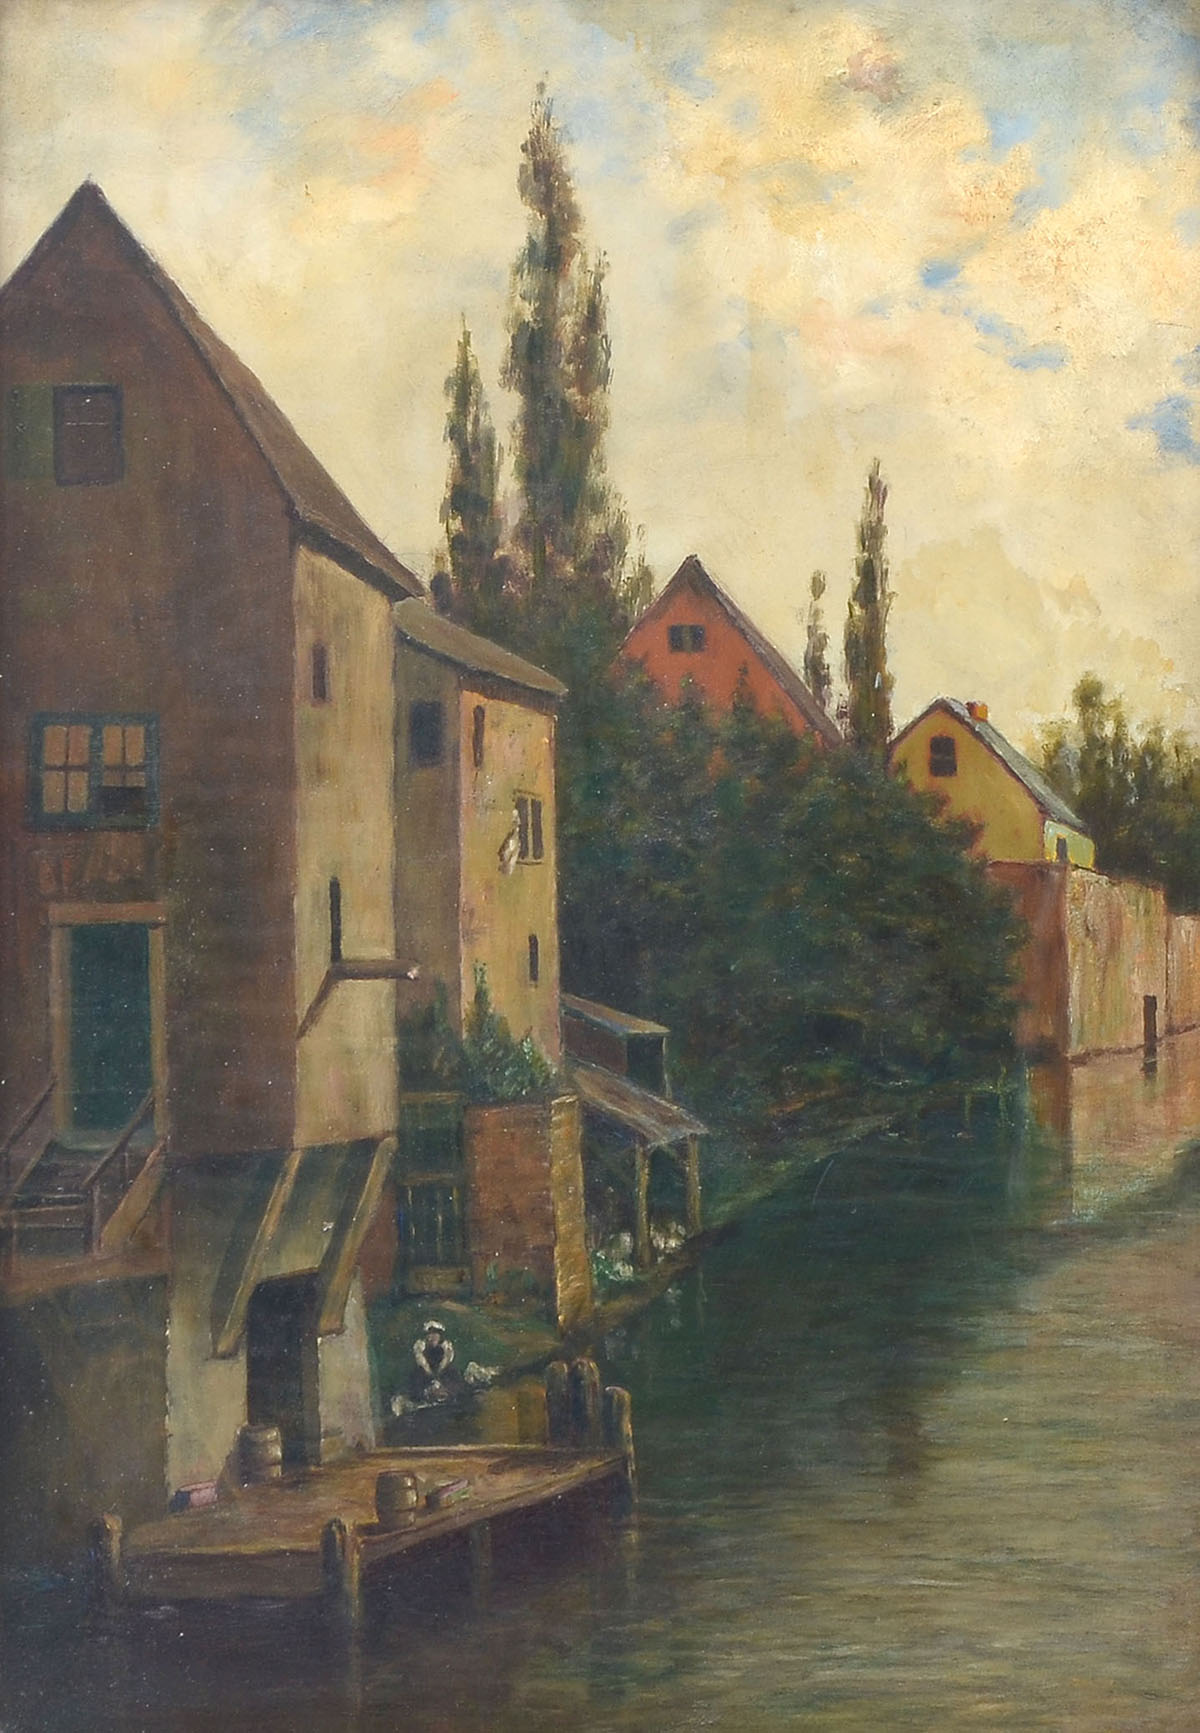 EUROPEAN CANAL PAINTING NEWCOMB 36d32c